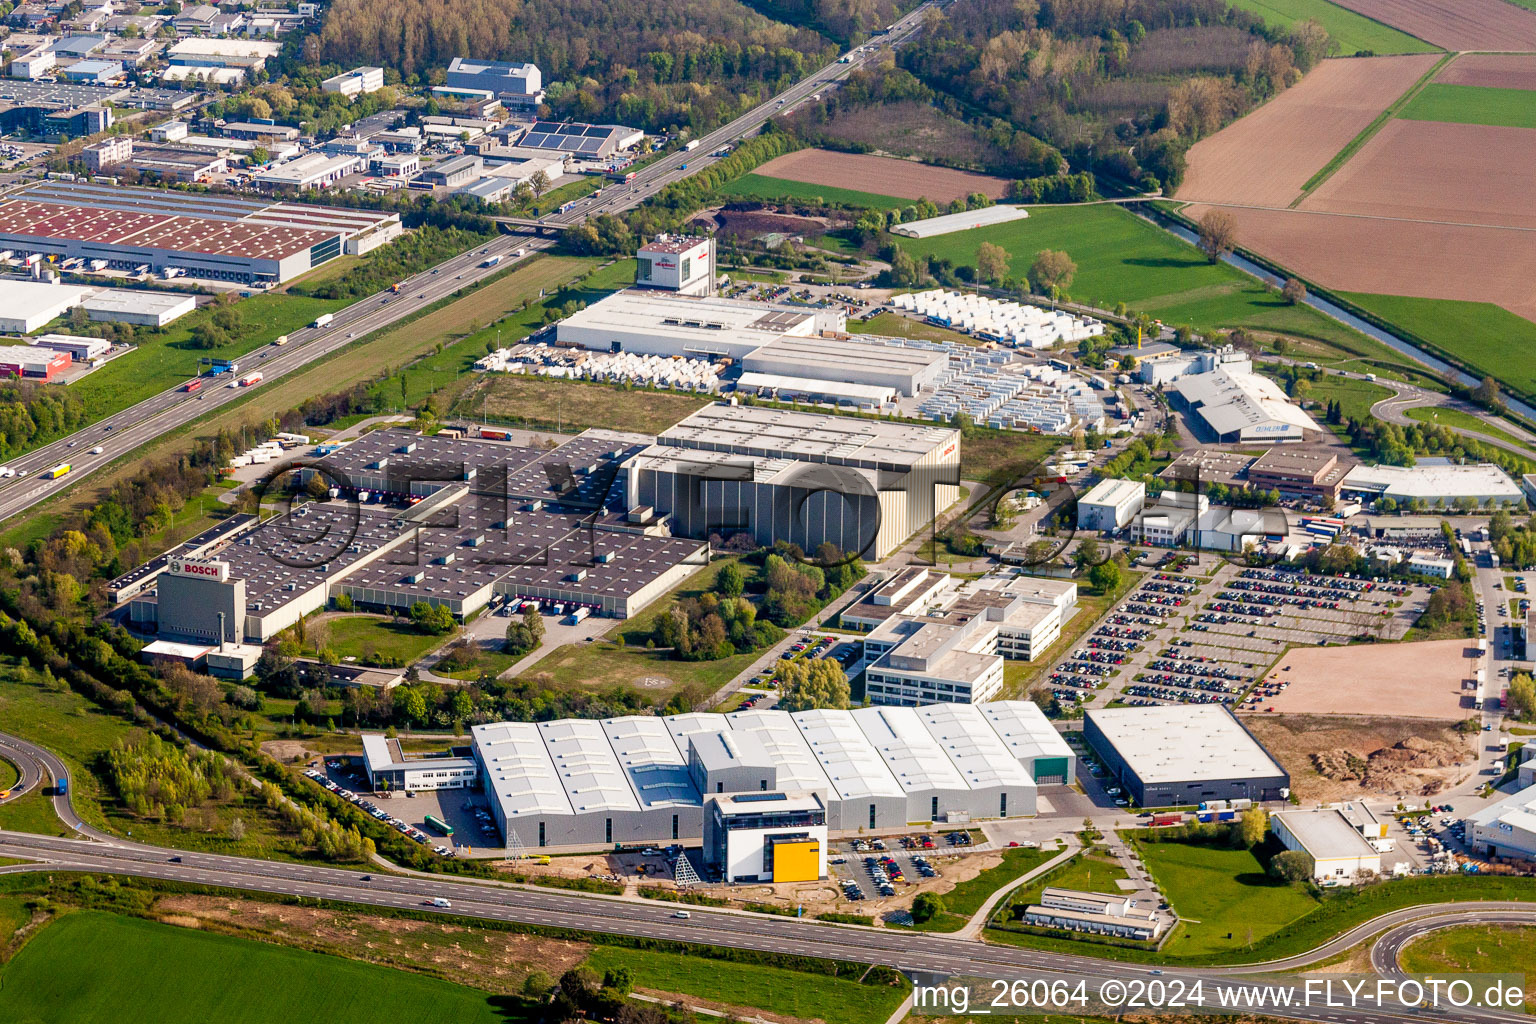 Building and production halls on the premises of Robert Bosch GmbH in the district Durlach in Karlsruhe in the state Baden-Wurttemberg, Germany